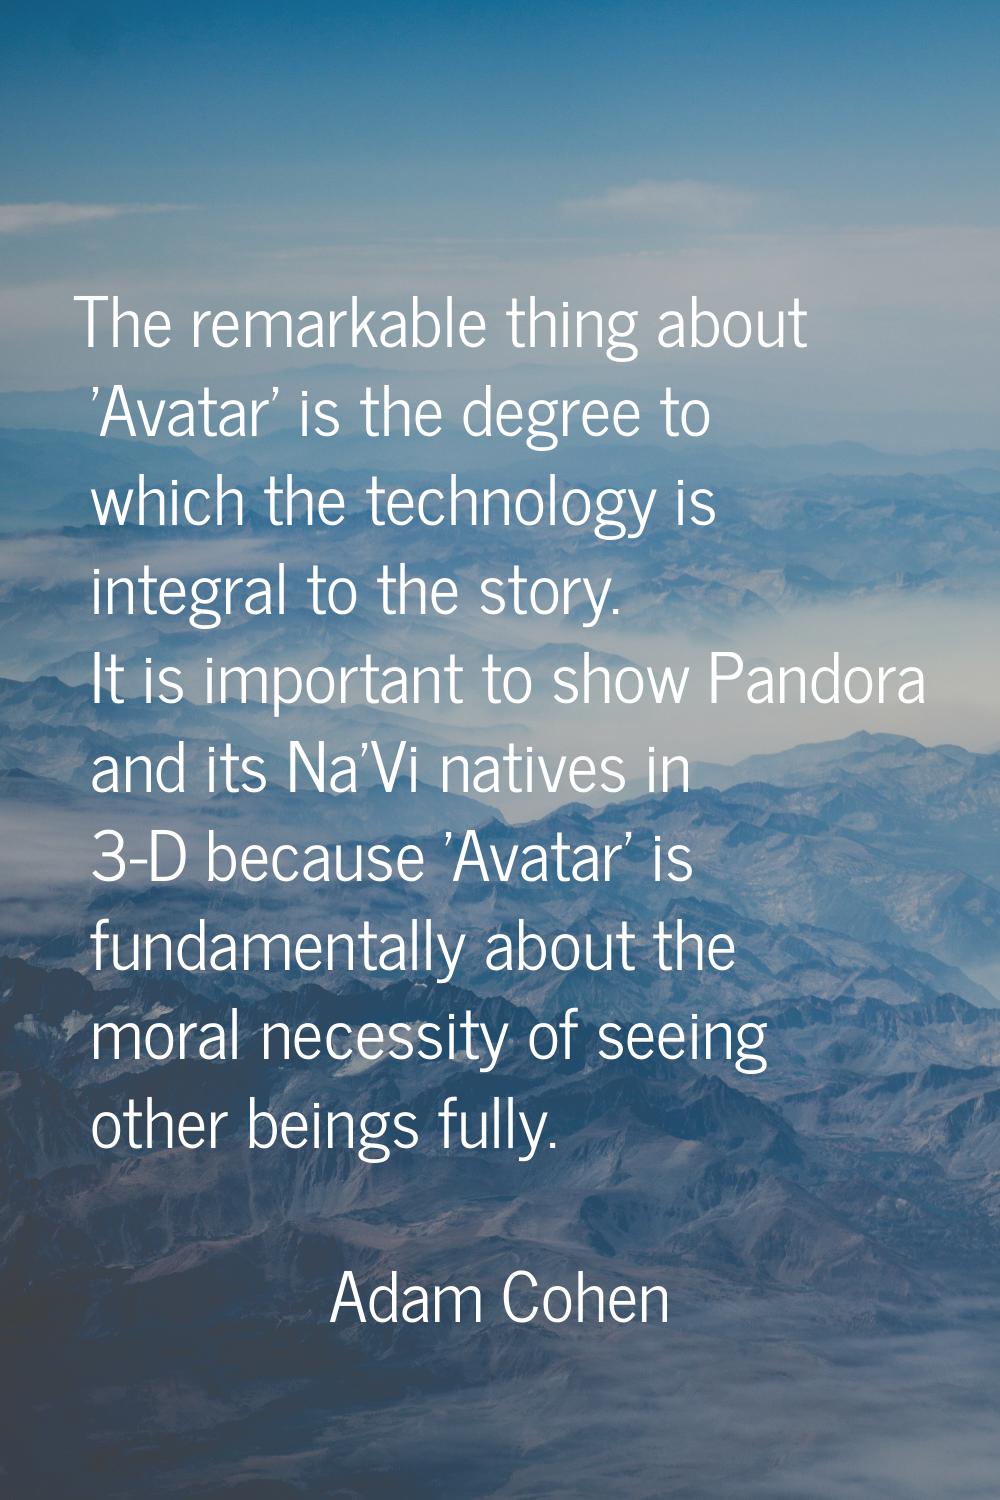 The remarkable thing about 'Avatar' is the degree to which the technology is integral to the story.